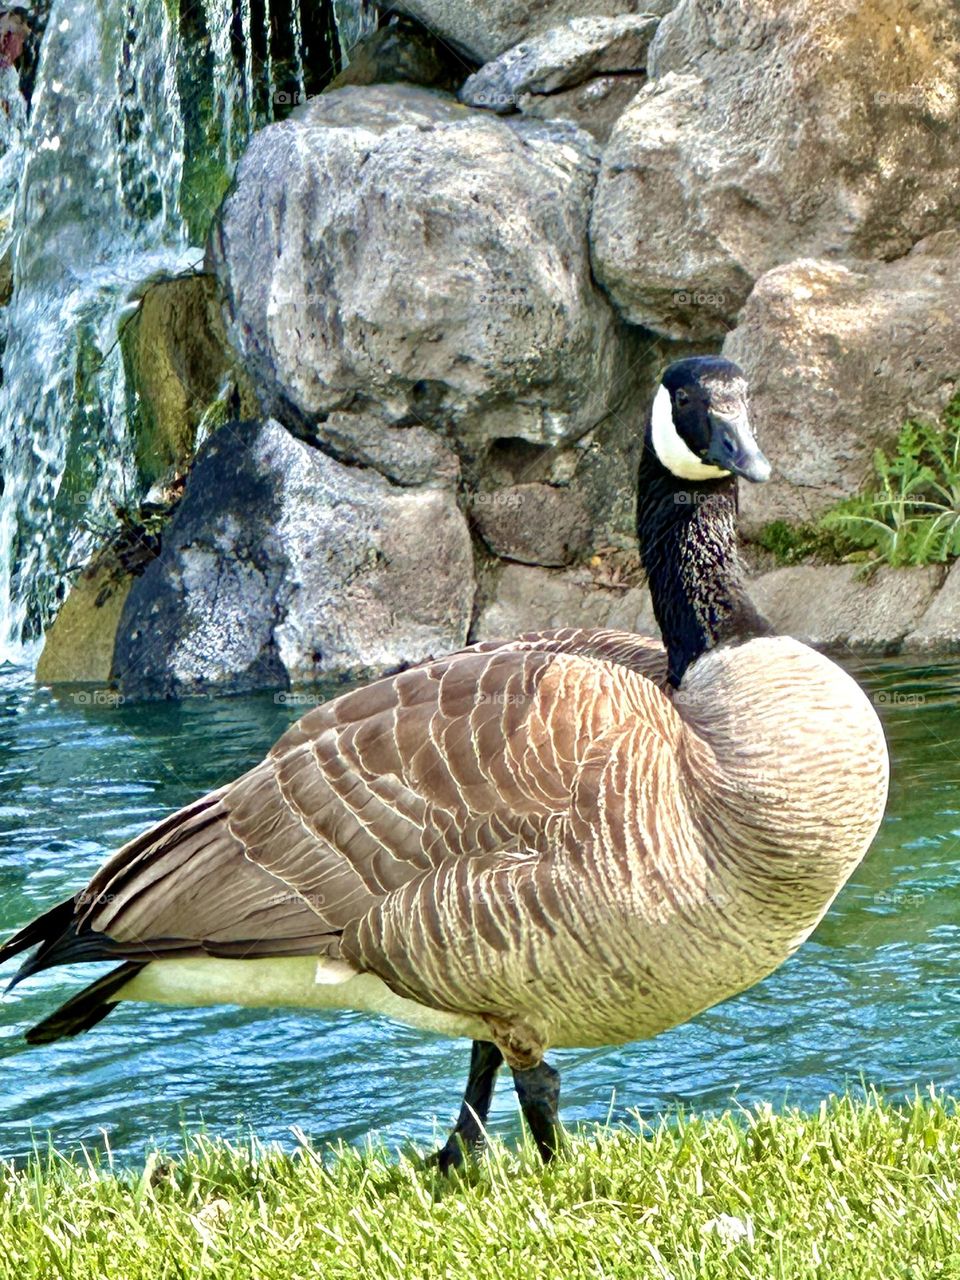 Soaking up the Cali sun! ☀️ A Canadian goose takes a break before its northward migration. Get captivating wildlife photos for your wall.